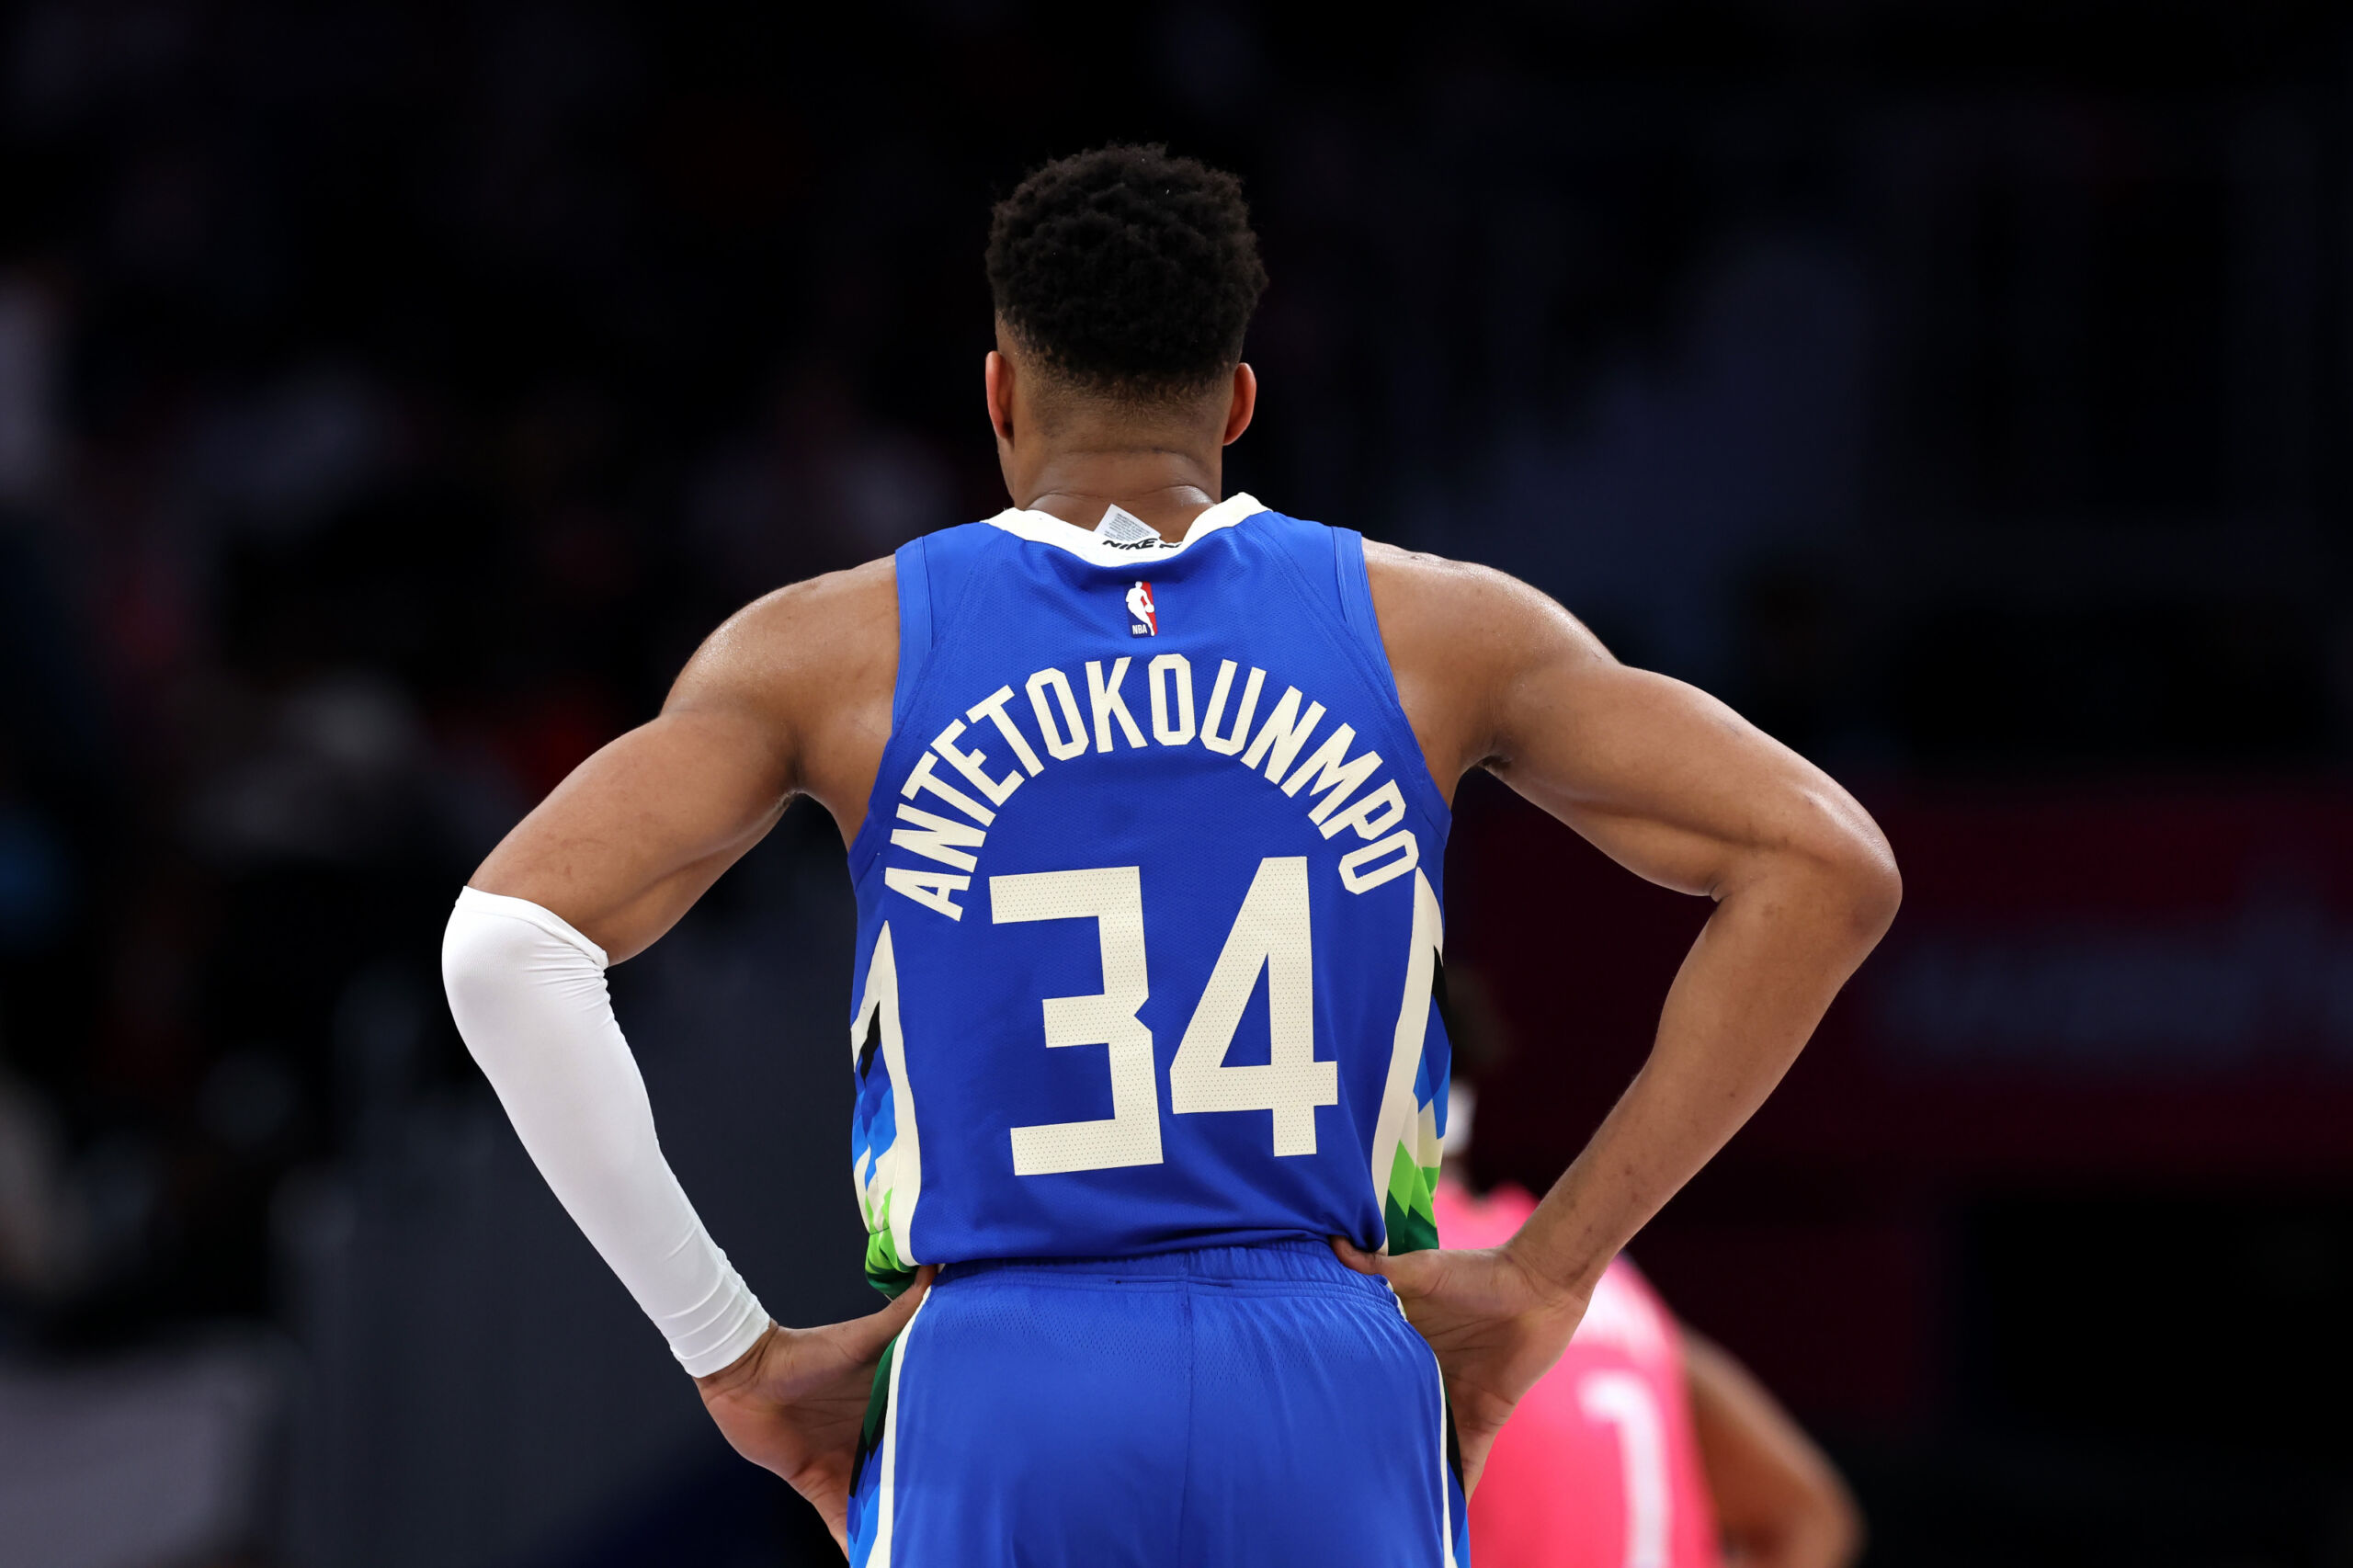 What's special about Giannis Antetokounmpo's jersey number 34